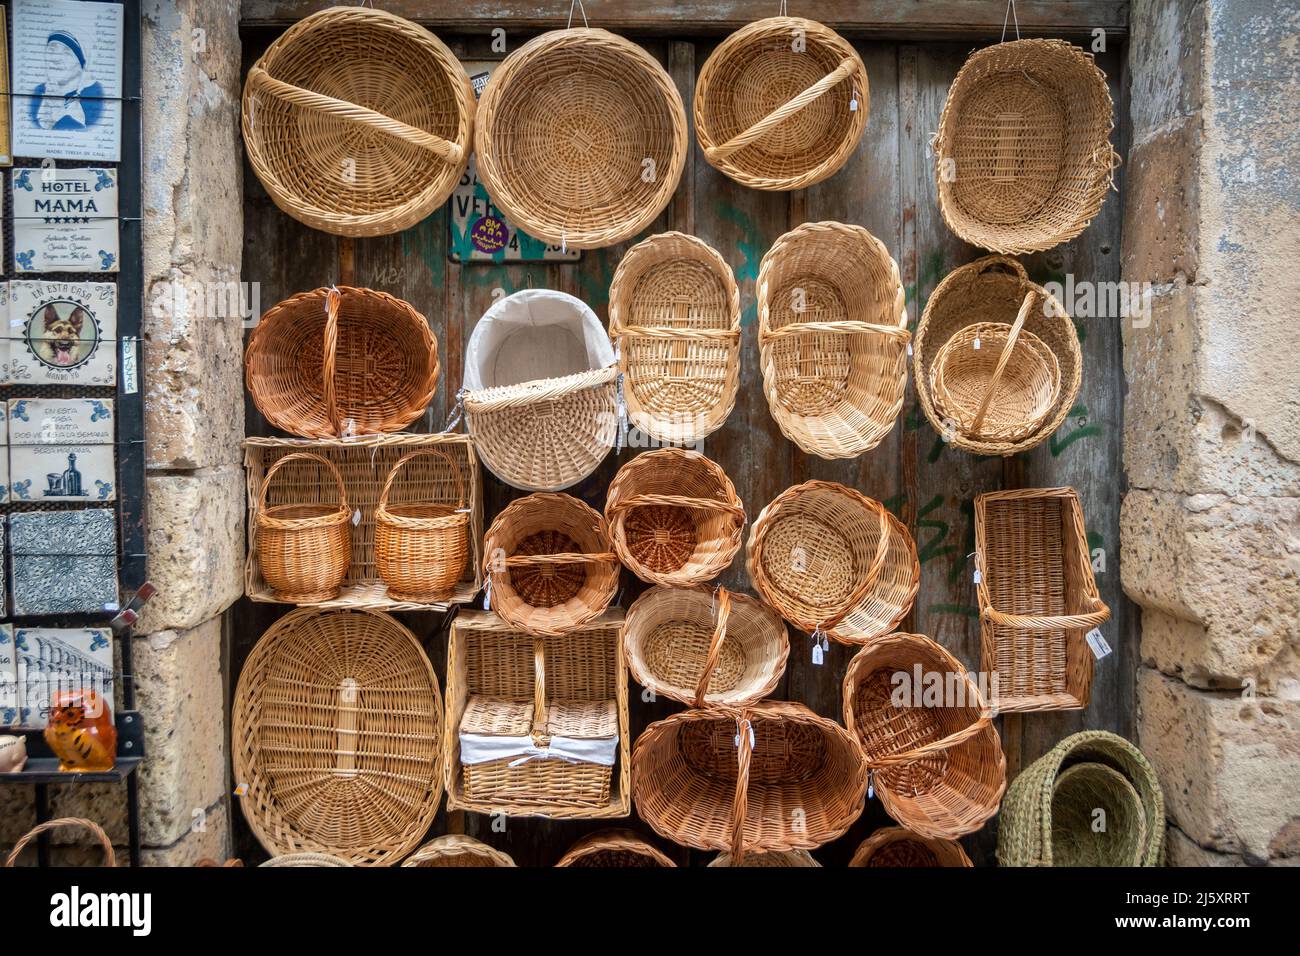 Wicker baskets of different shapes and sizes Segovia, Spain Stock Photo